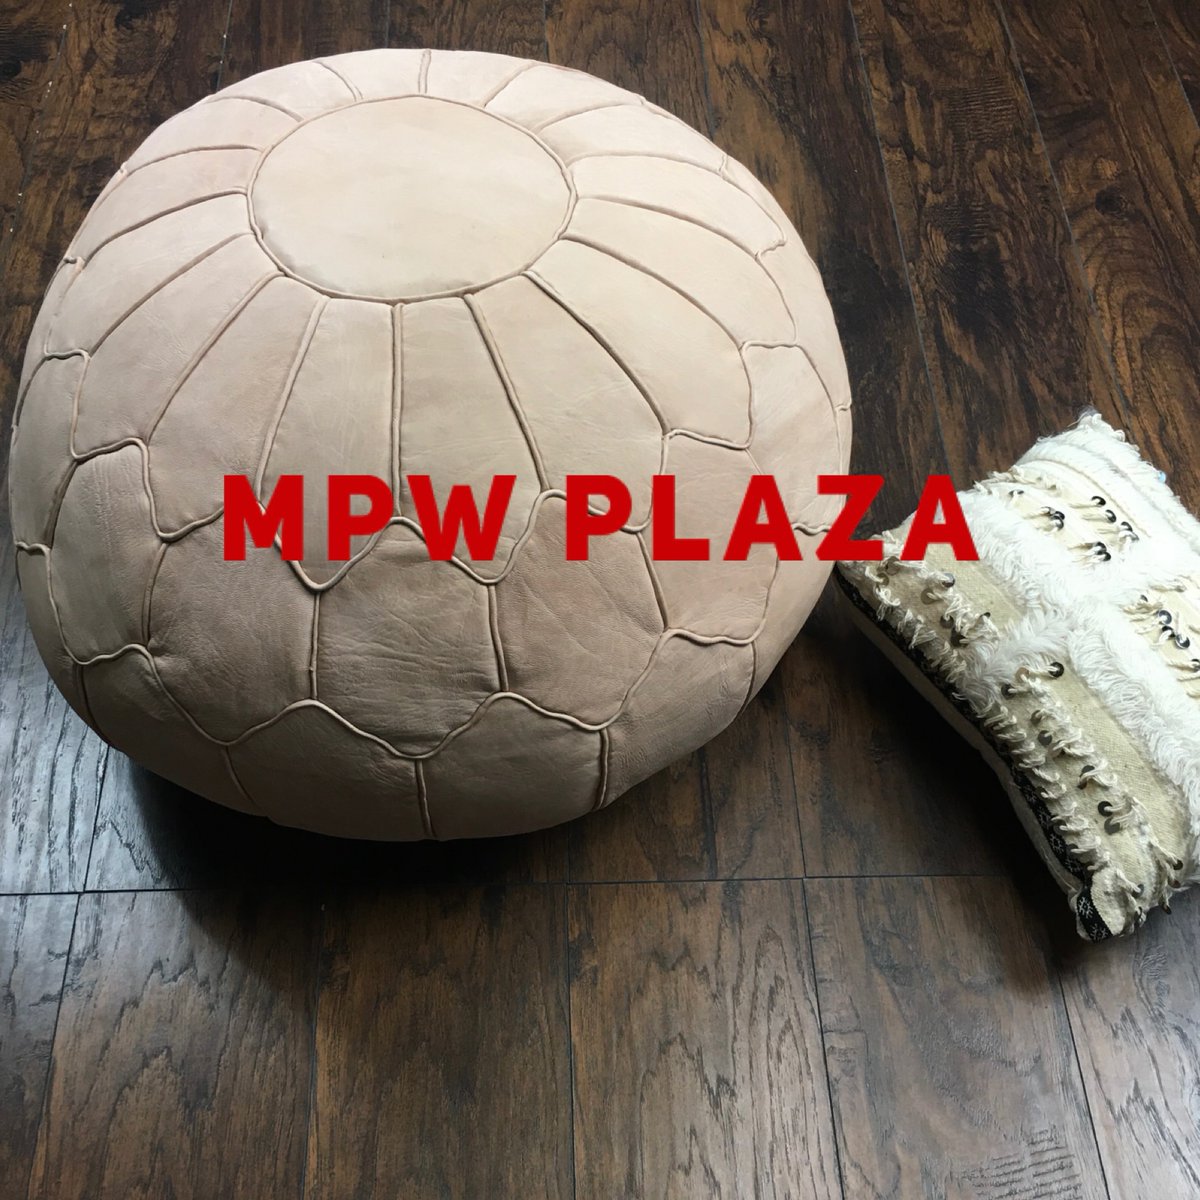 🌹Treat yourself to a Premium MPWplaza Luxury Pouf 🌺 ships from USA🌹
#luxuryhouses #luxurylifestyles #luxurygirl #luxurylivingroom #luxurystyle #luxuryapartments #luxuryshopping #luxuryshoes #luxurybags #luxurycollection #luxurycondos #luxurymansion #luxuryproperty #affiliate